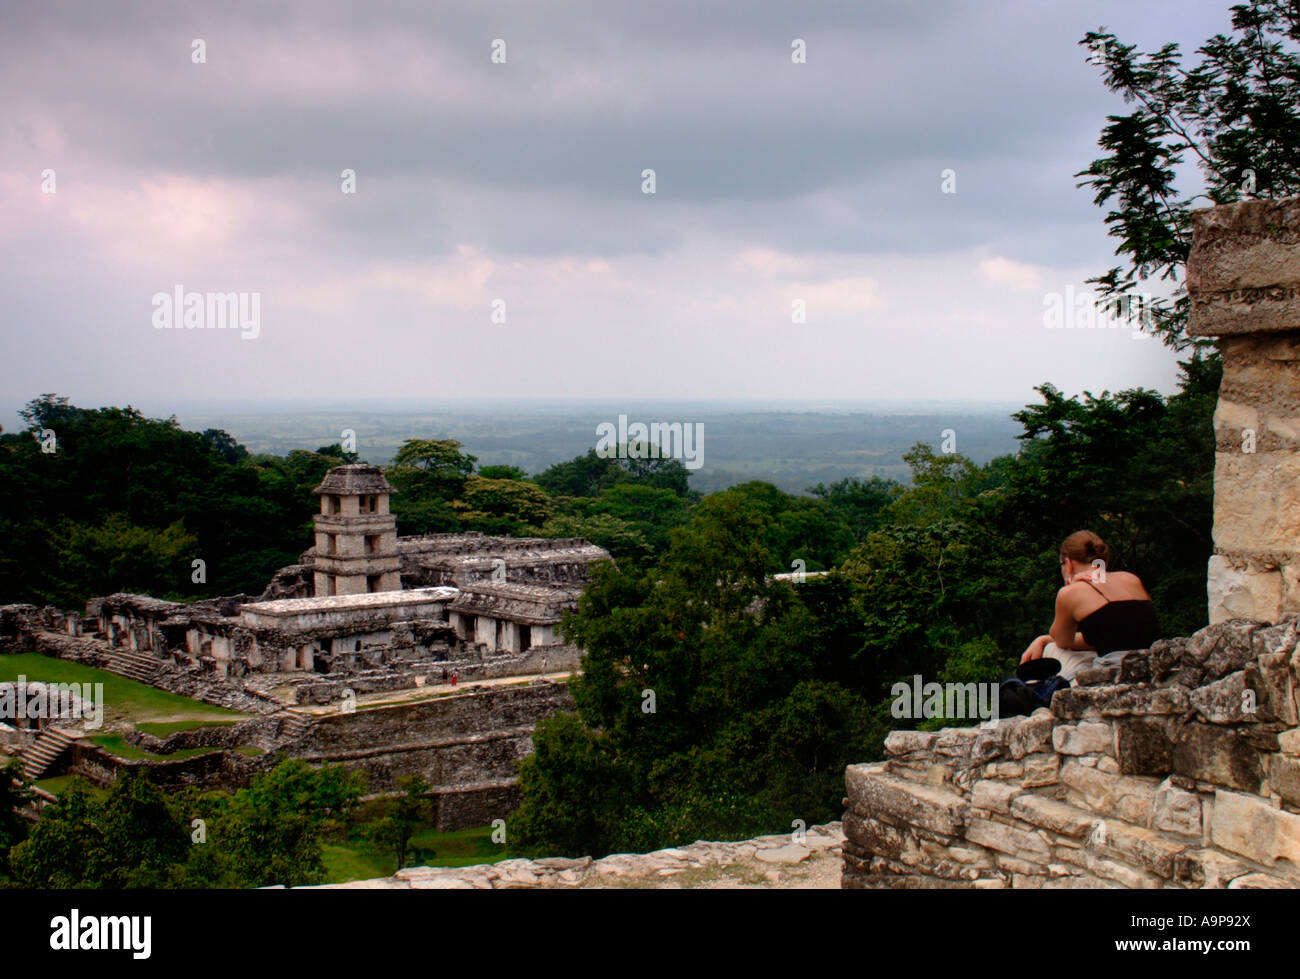 Tourist views the Palace at Palenque a Mayan archaeological ruinsite in Chiapas, Mexico Stock Photo